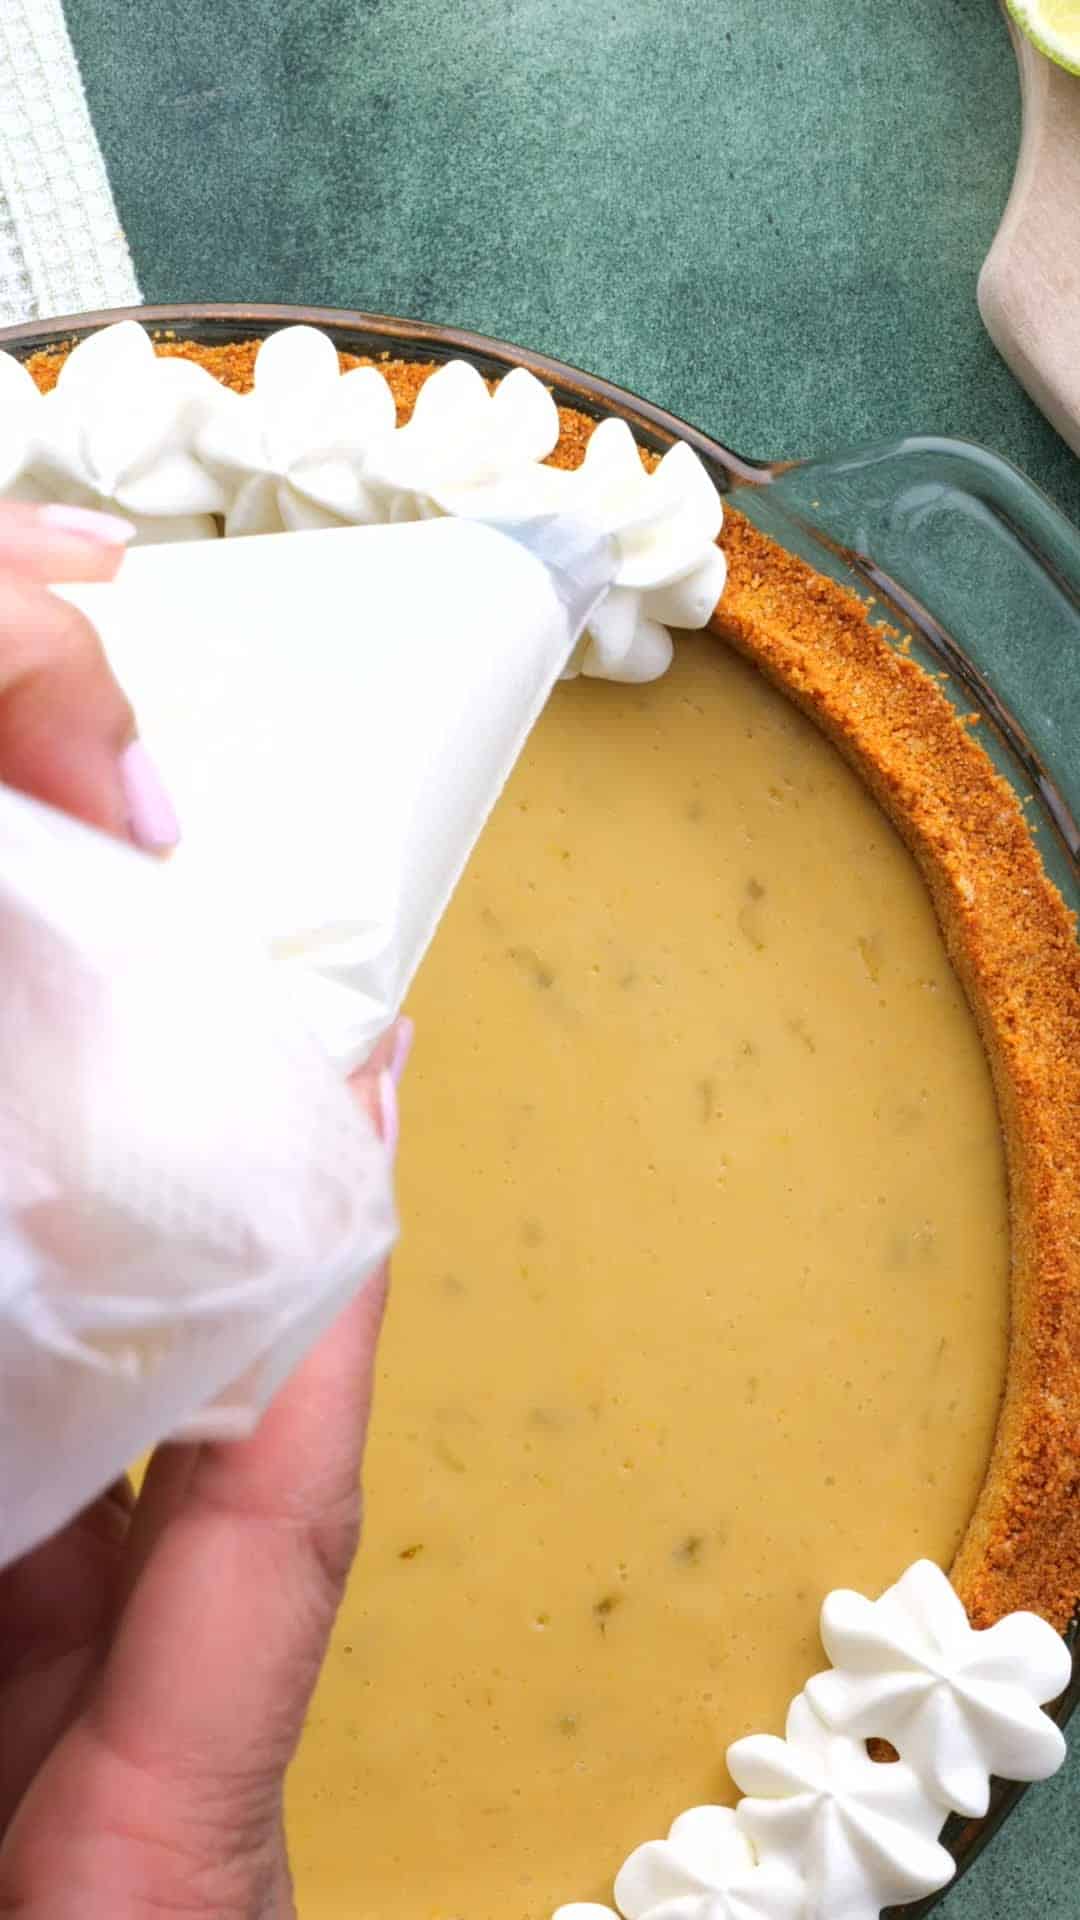 Whipped cream being piped around the crust of a key lime pie